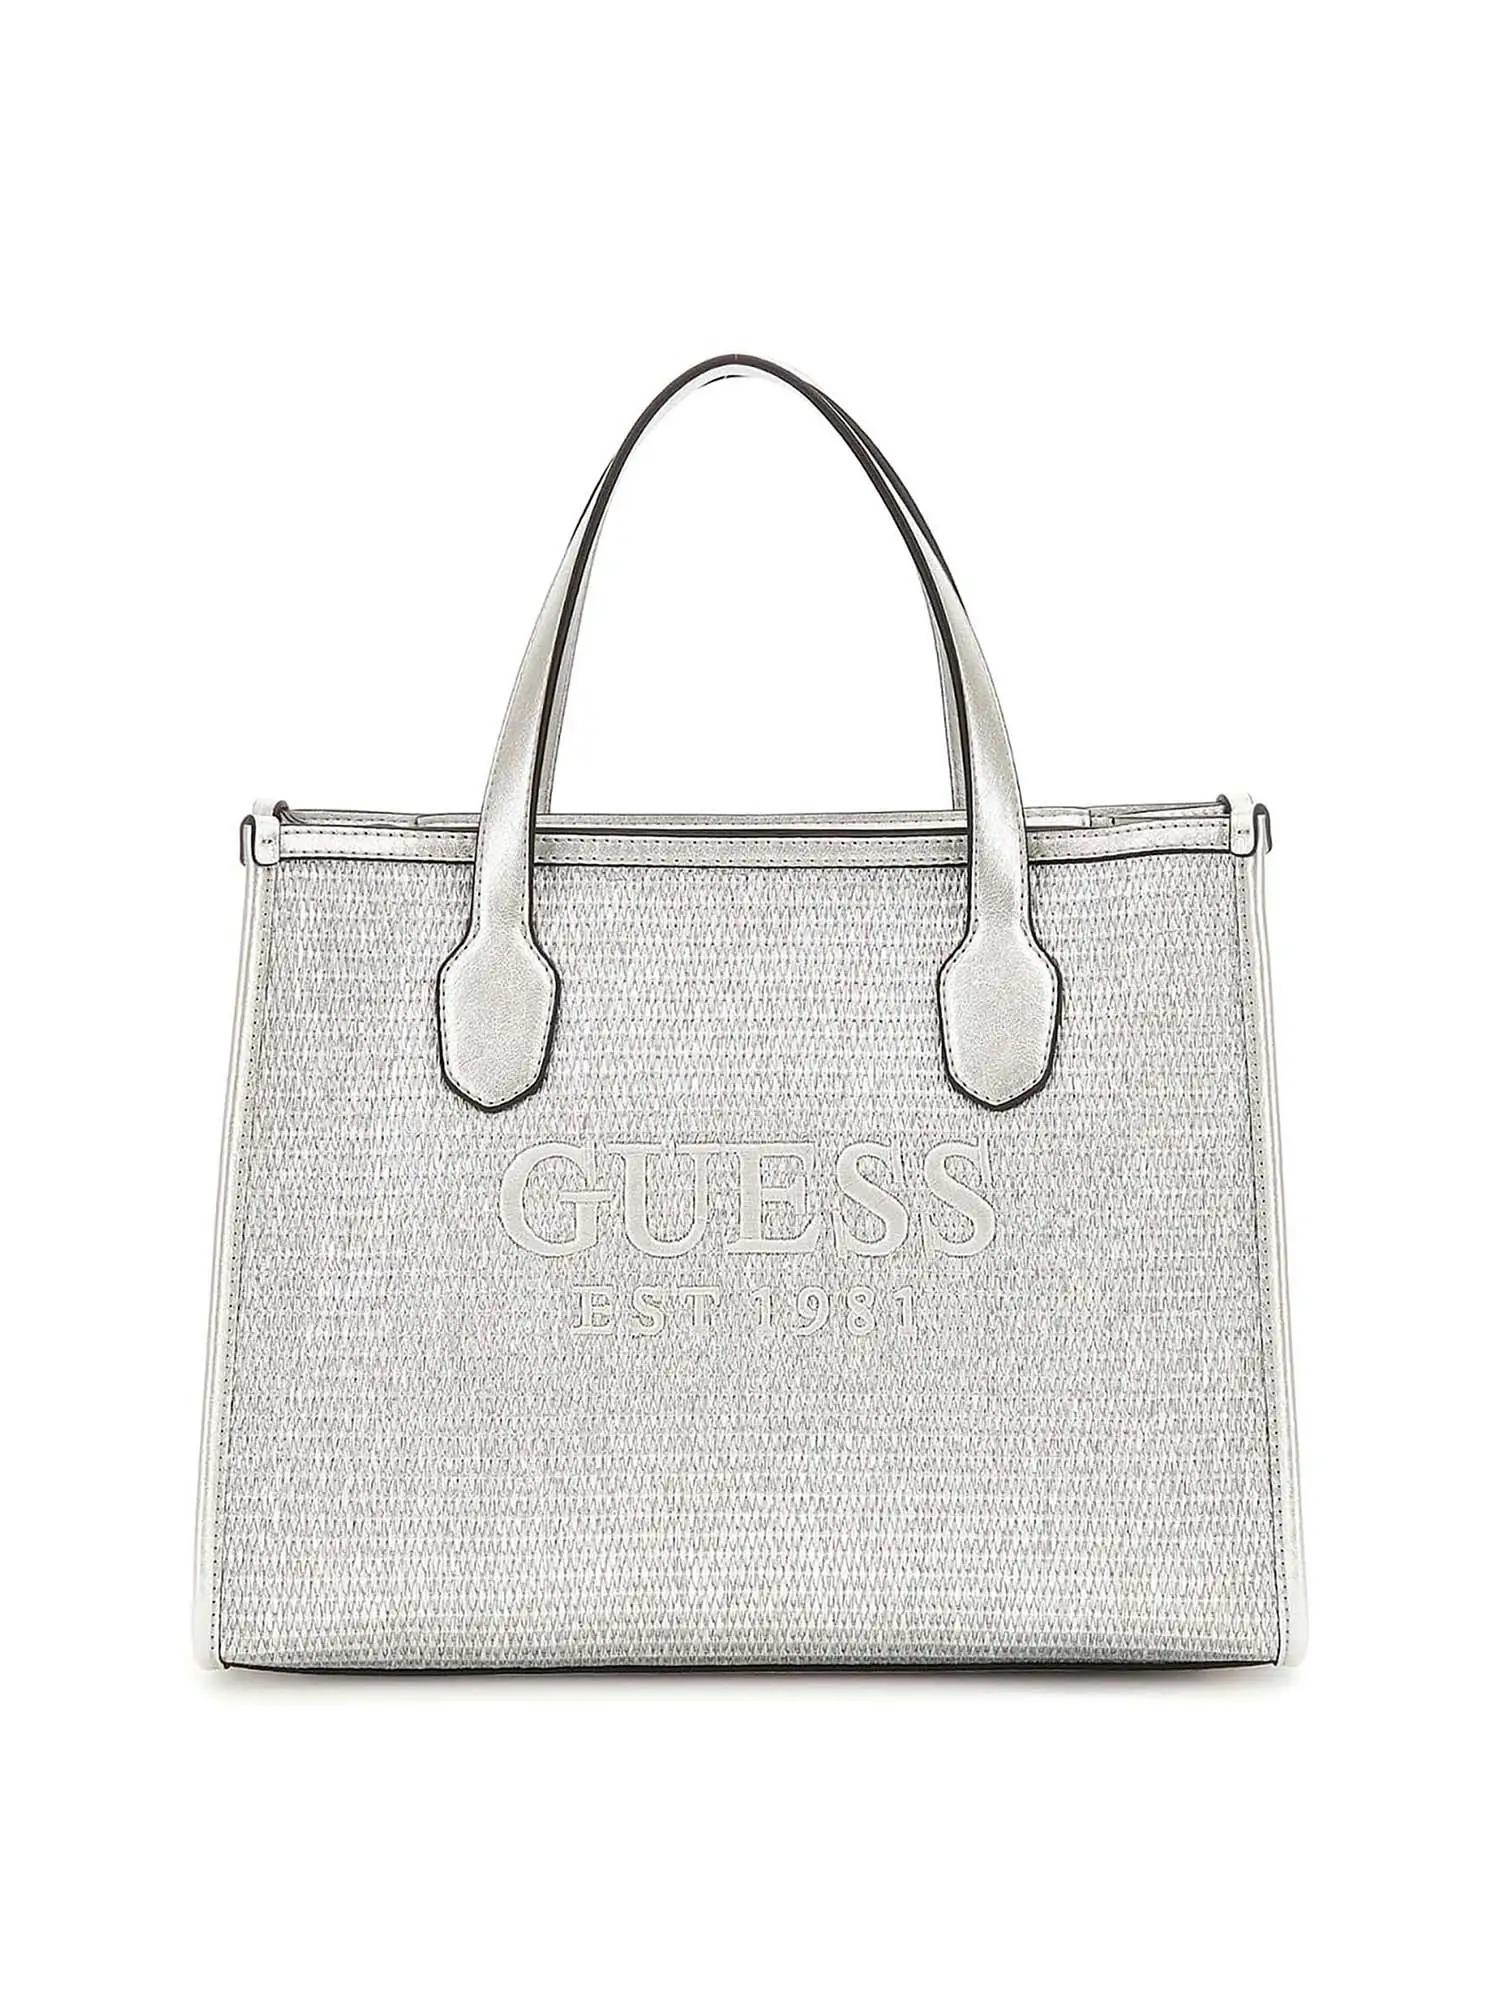 TOTE DONNA - GUESS - HWWY86 65220 - ARGENTO, UNICA